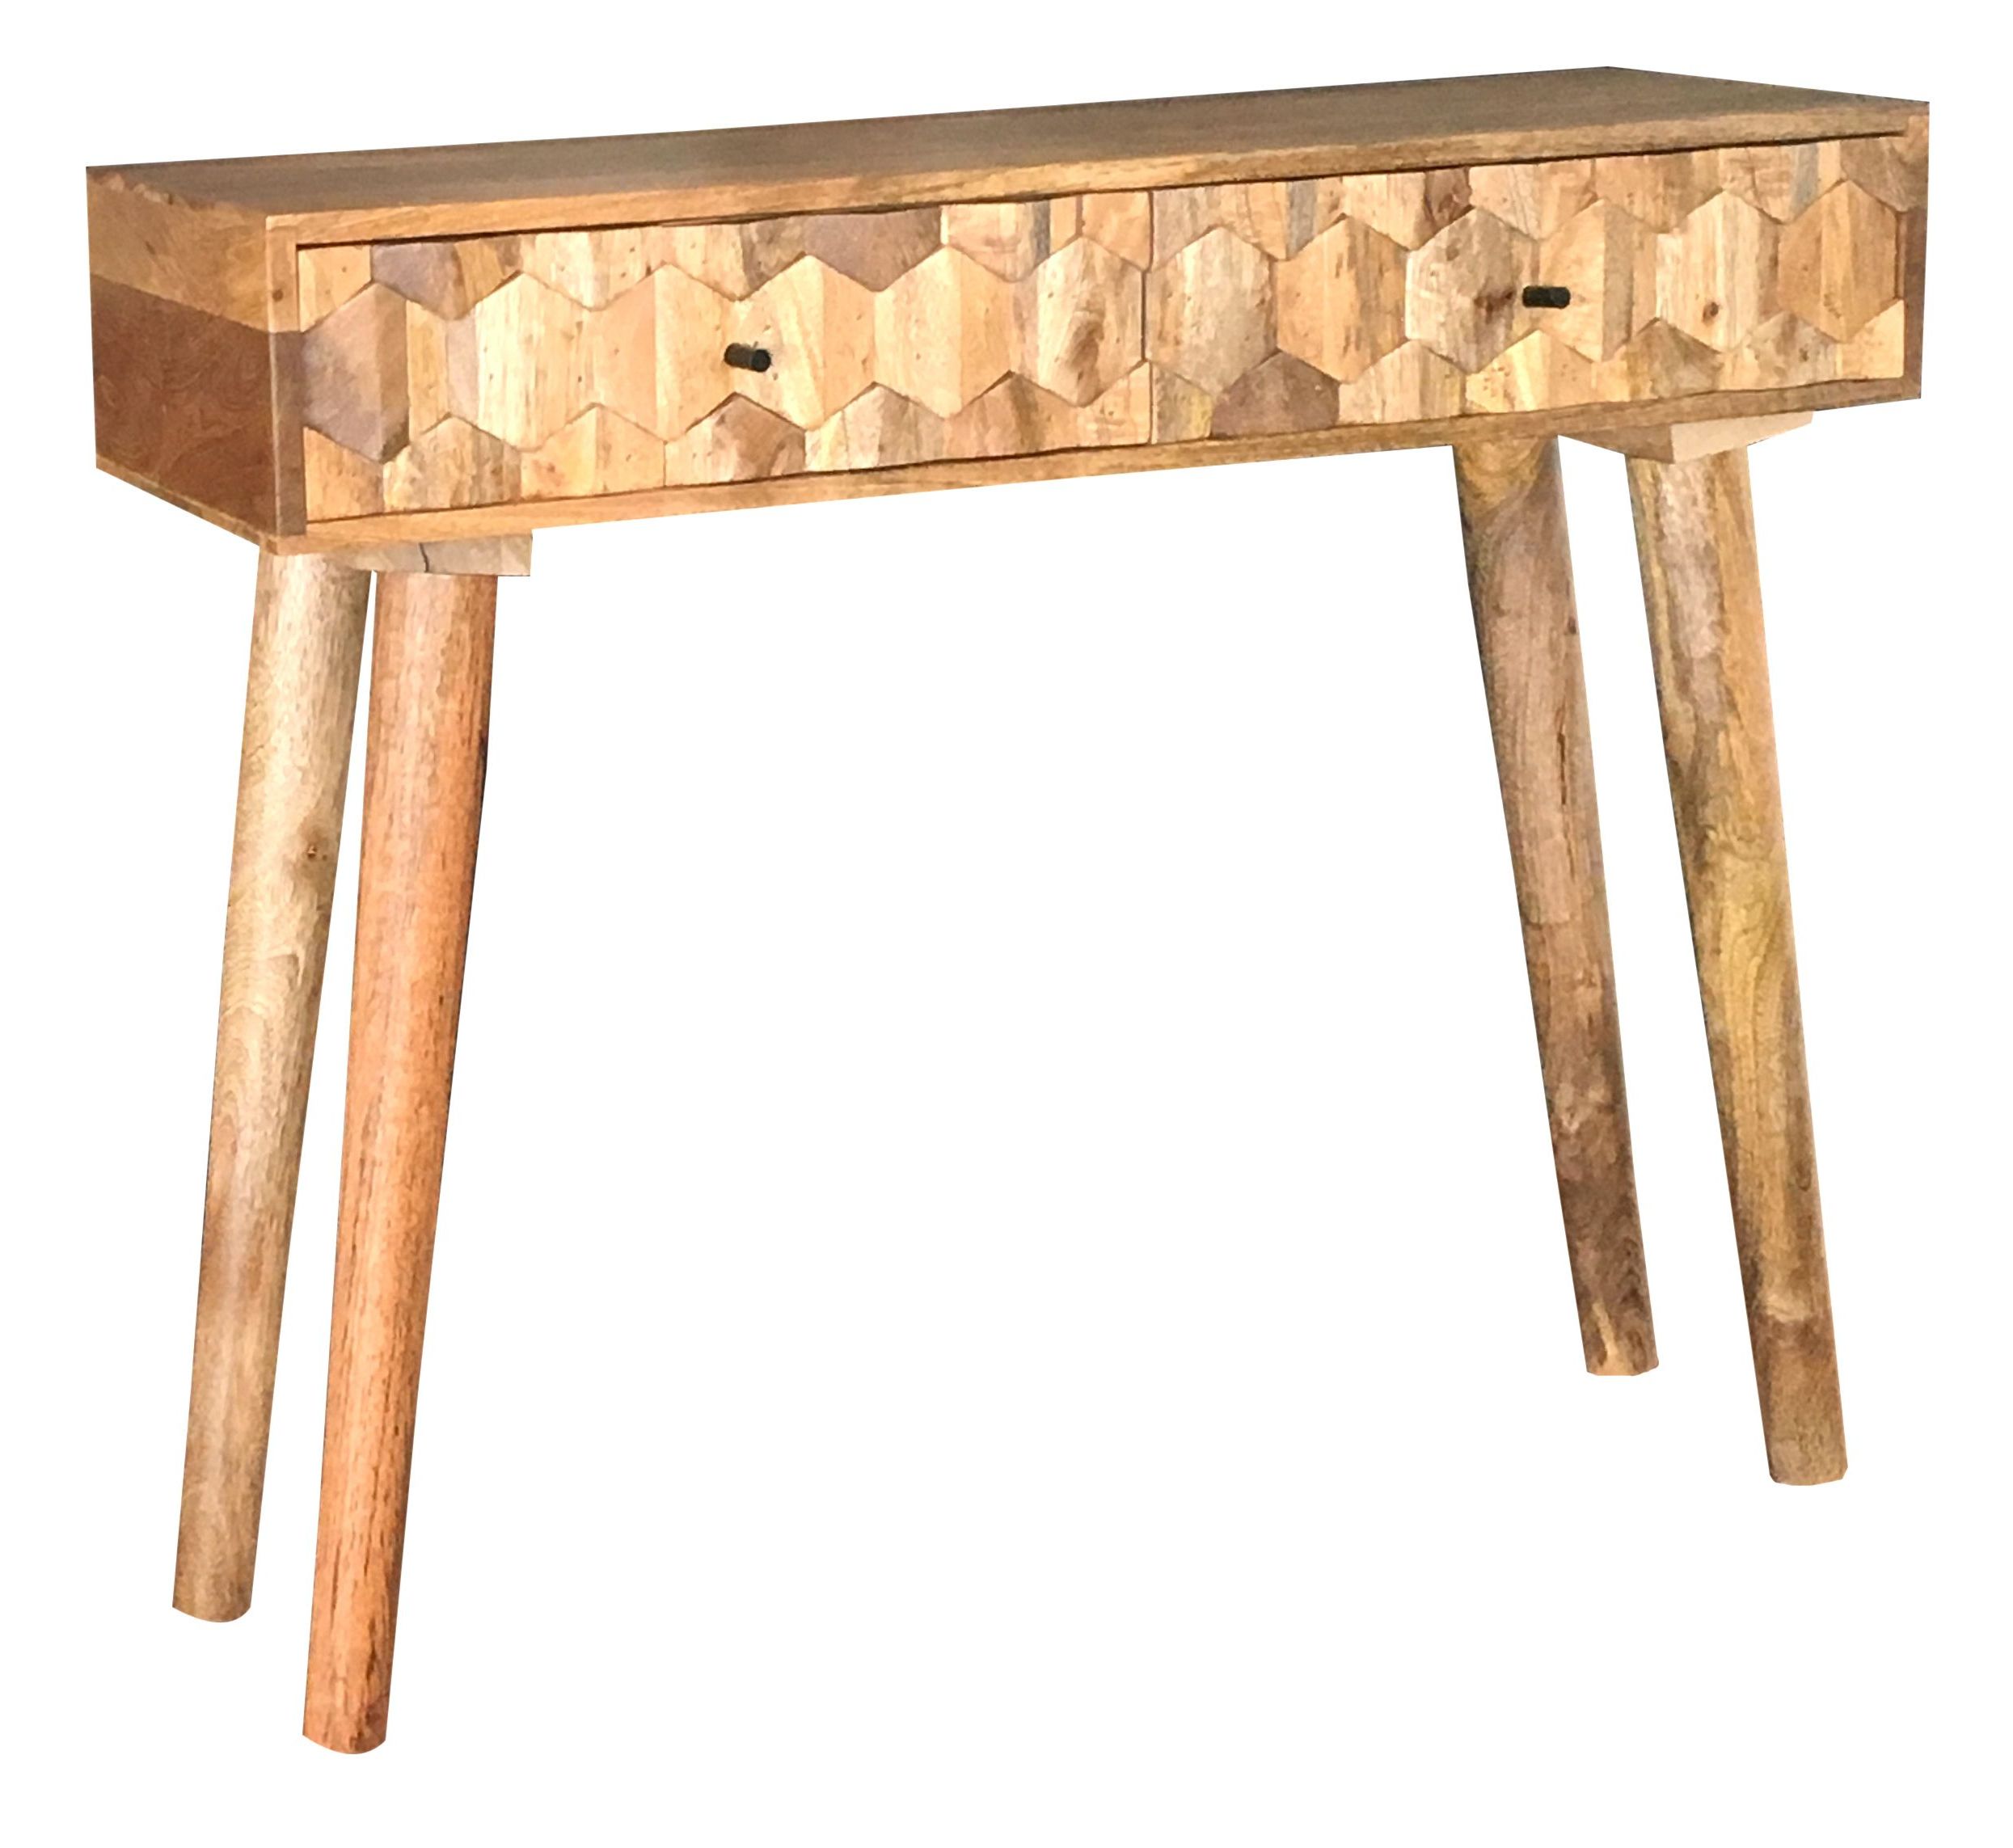 Widely Used Natural Mango Wood Console Tables Pertaining To 2 Drawer Light Mango Wood Hexagonal Patters Console Table (View 9 of 10)